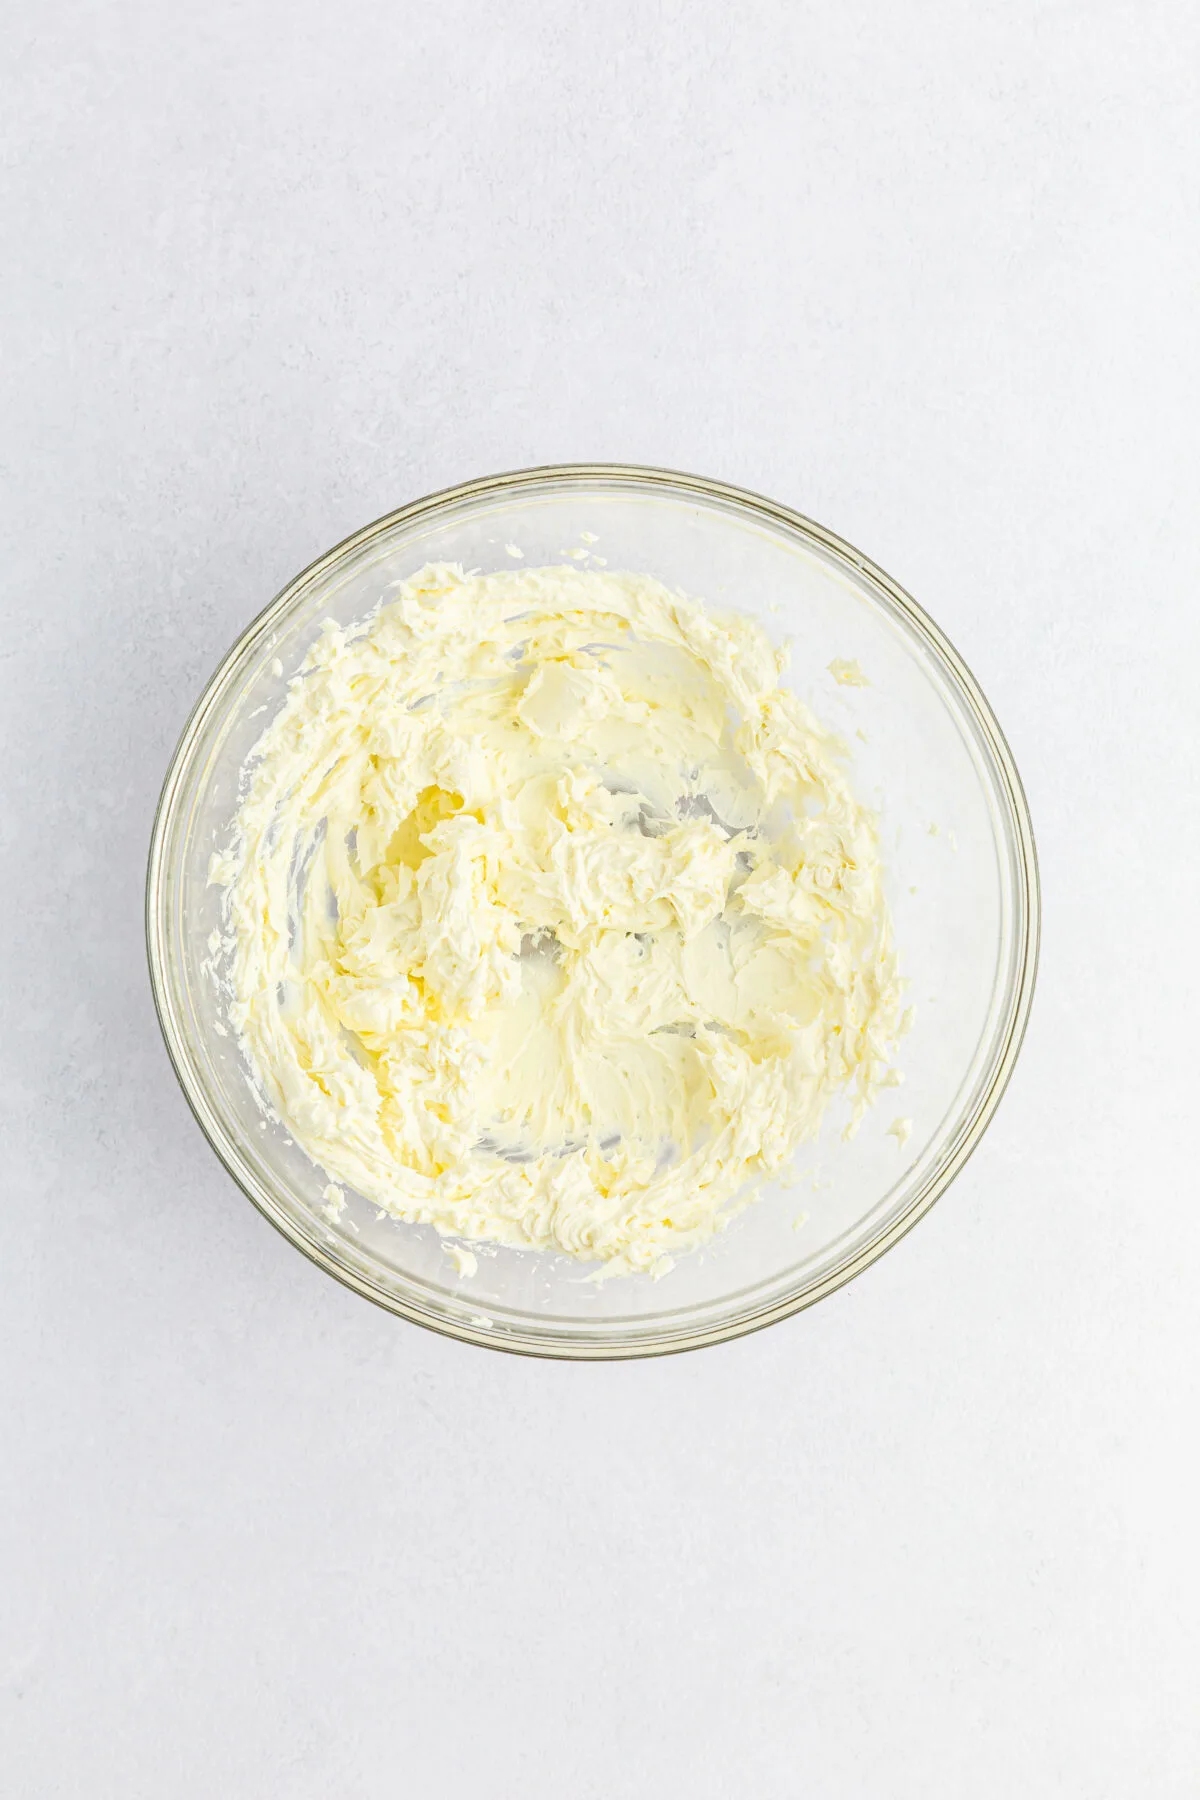 Cream cheese beaten until smooth in a mixing bowl.